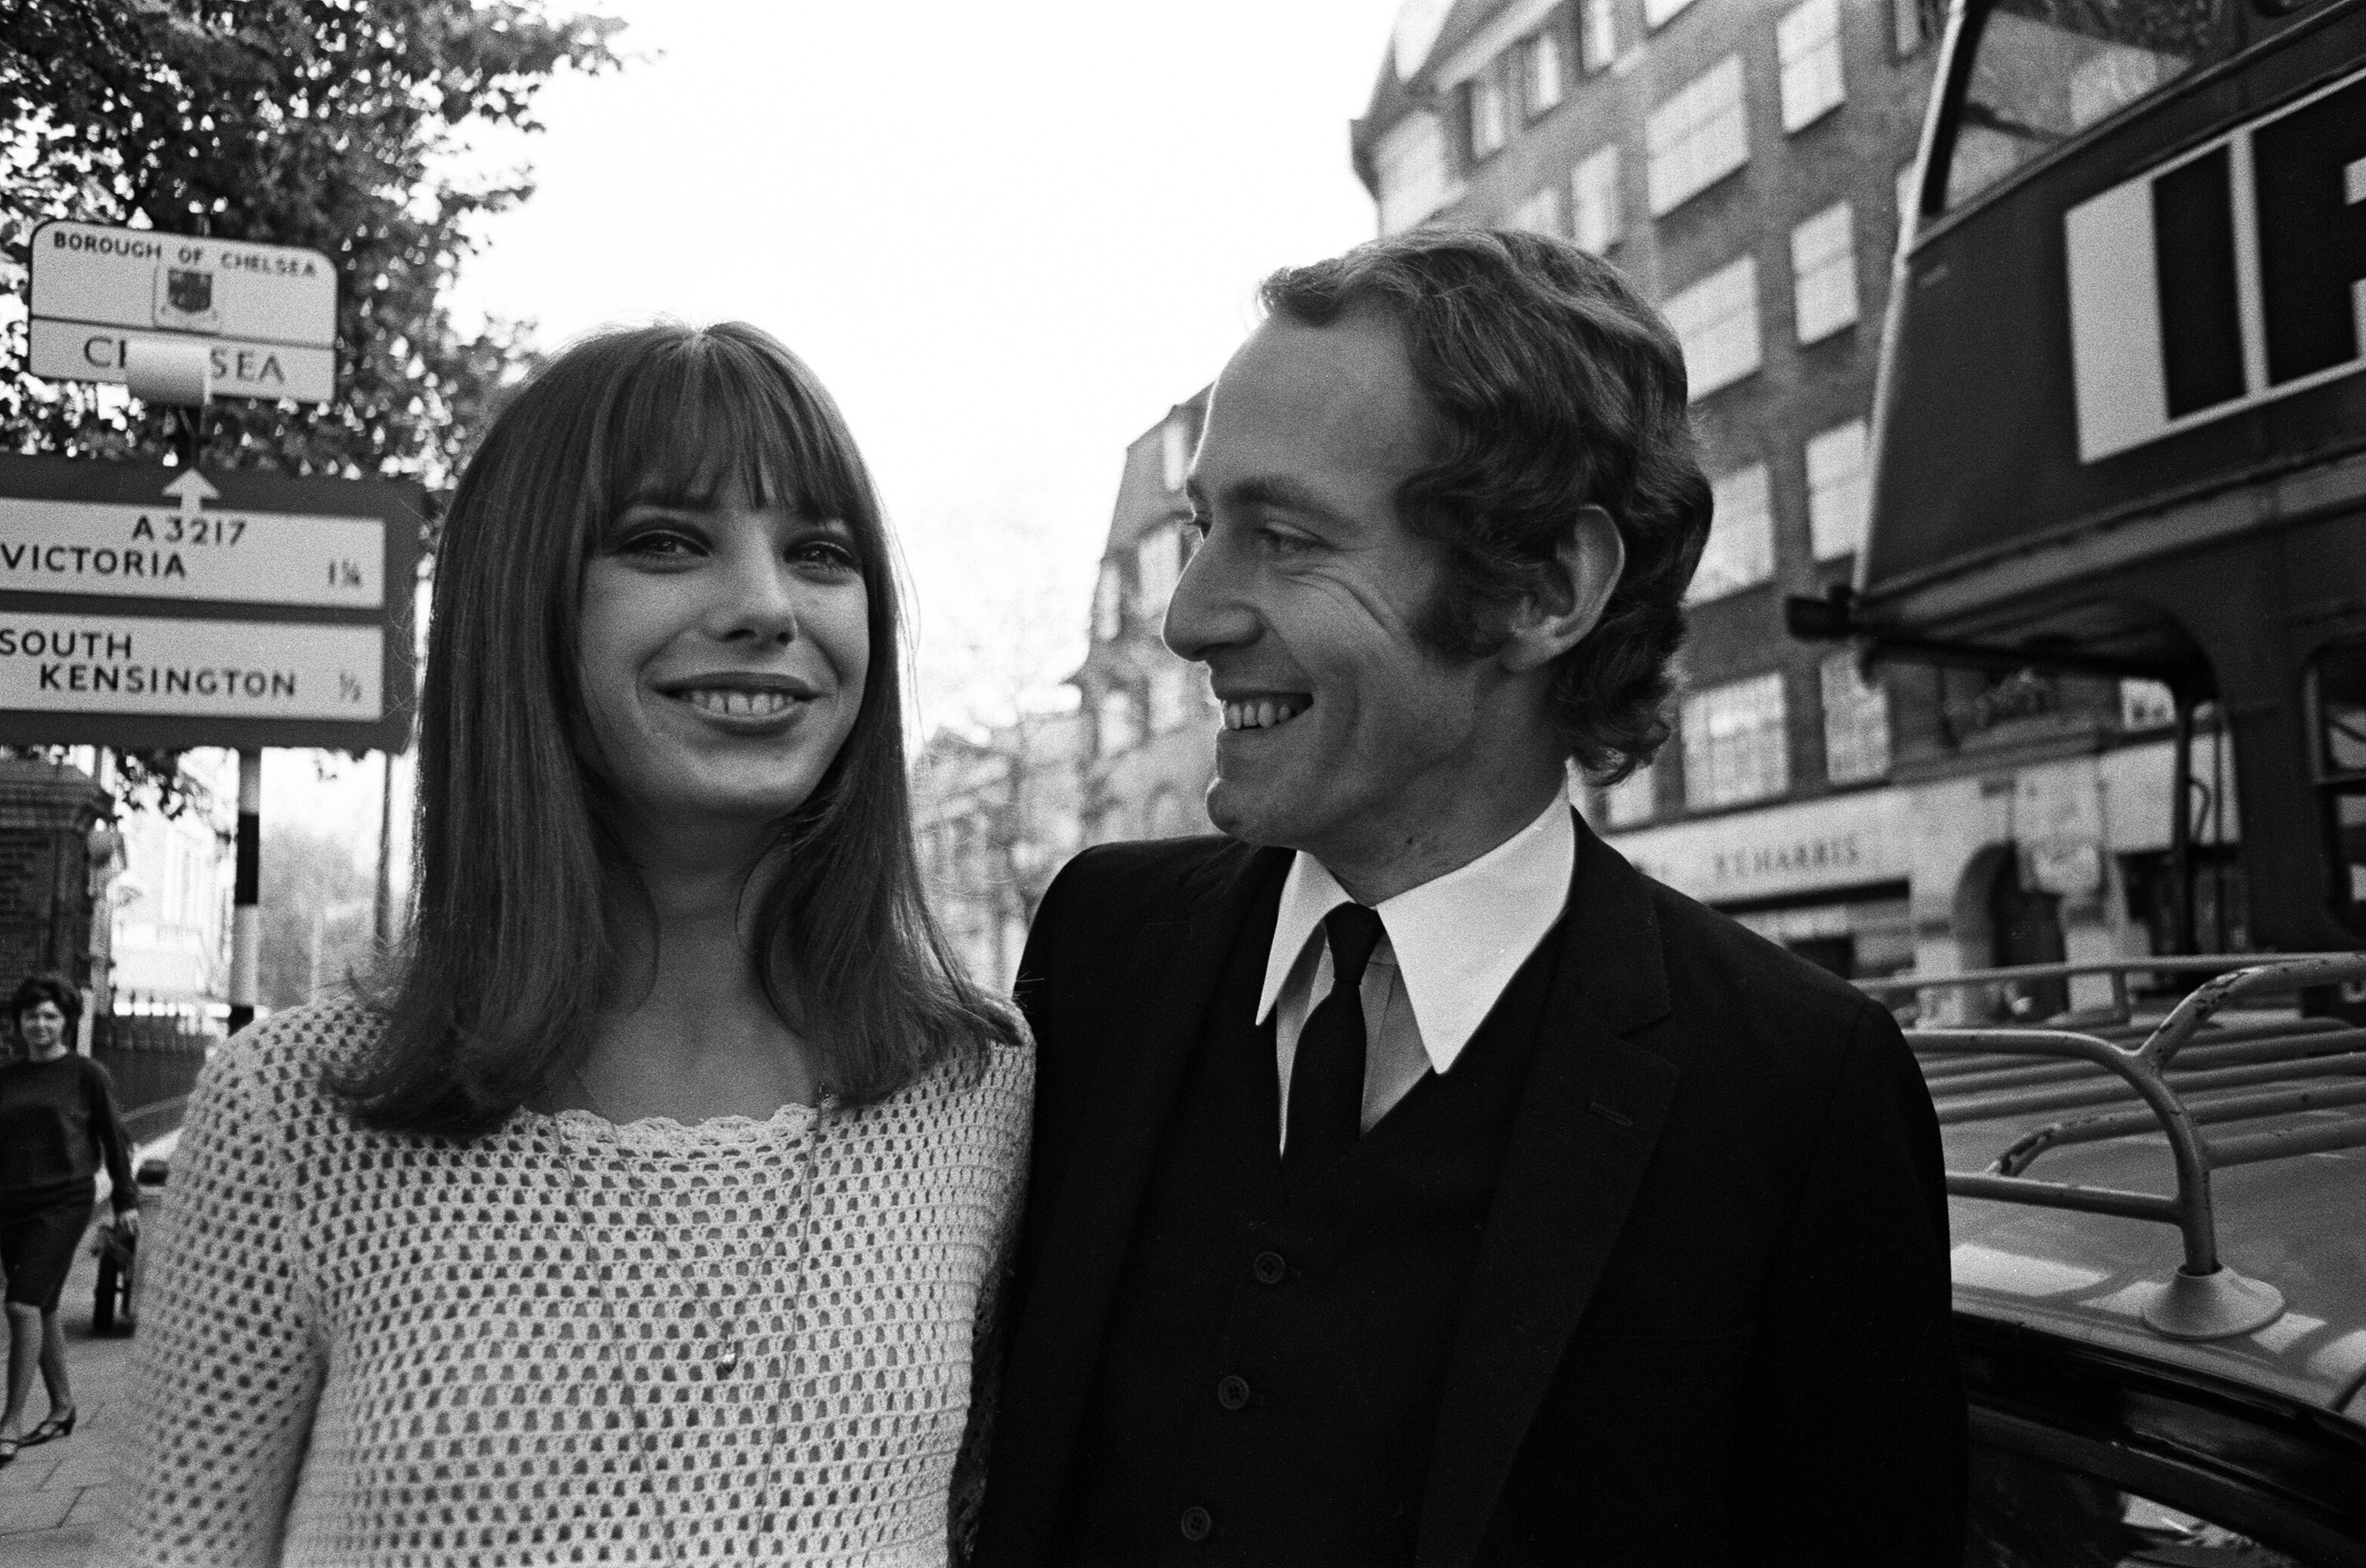 18-year-old Jane Birkin, currently starring in the lead role of 'Passion Flower Hotel' marries in secret at Chelsea Registry Office London to John Barry, aged 30, 16th October 1965. | Source: Getty Images